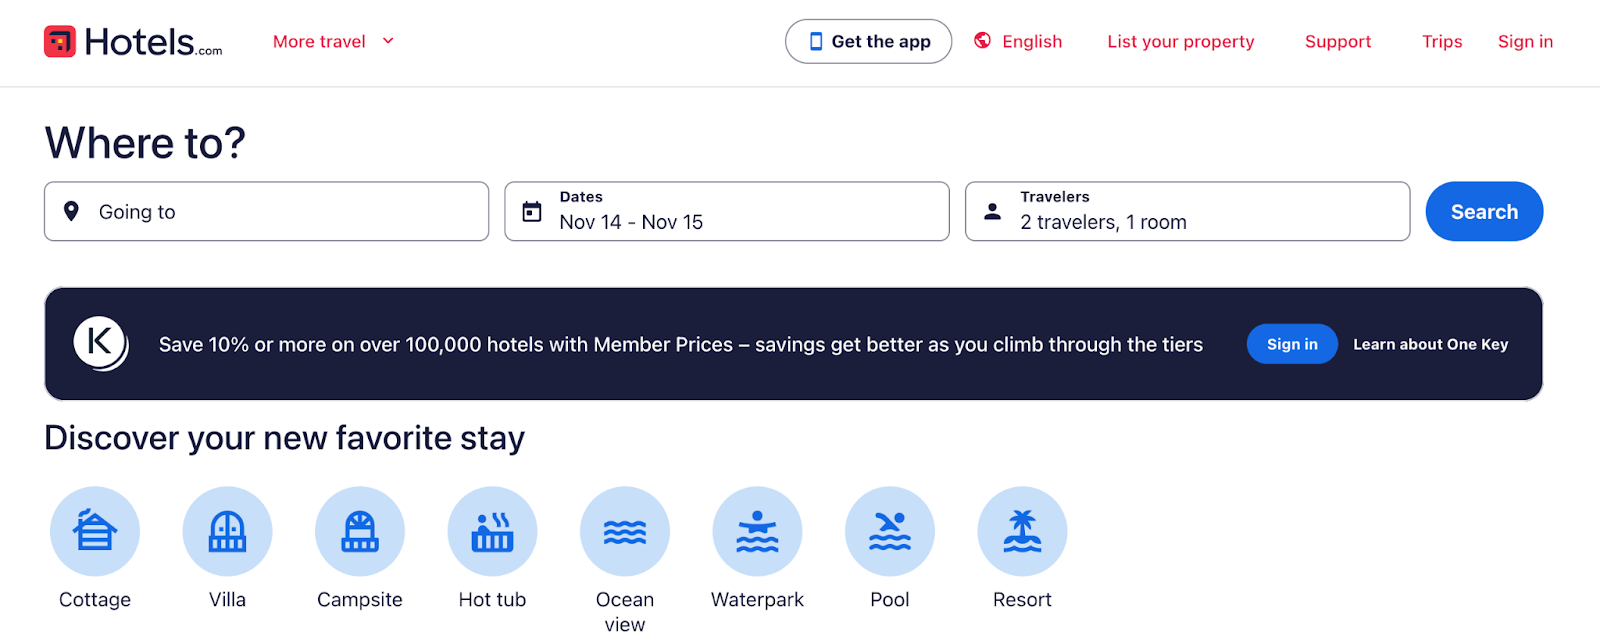 Hotels.com booking page